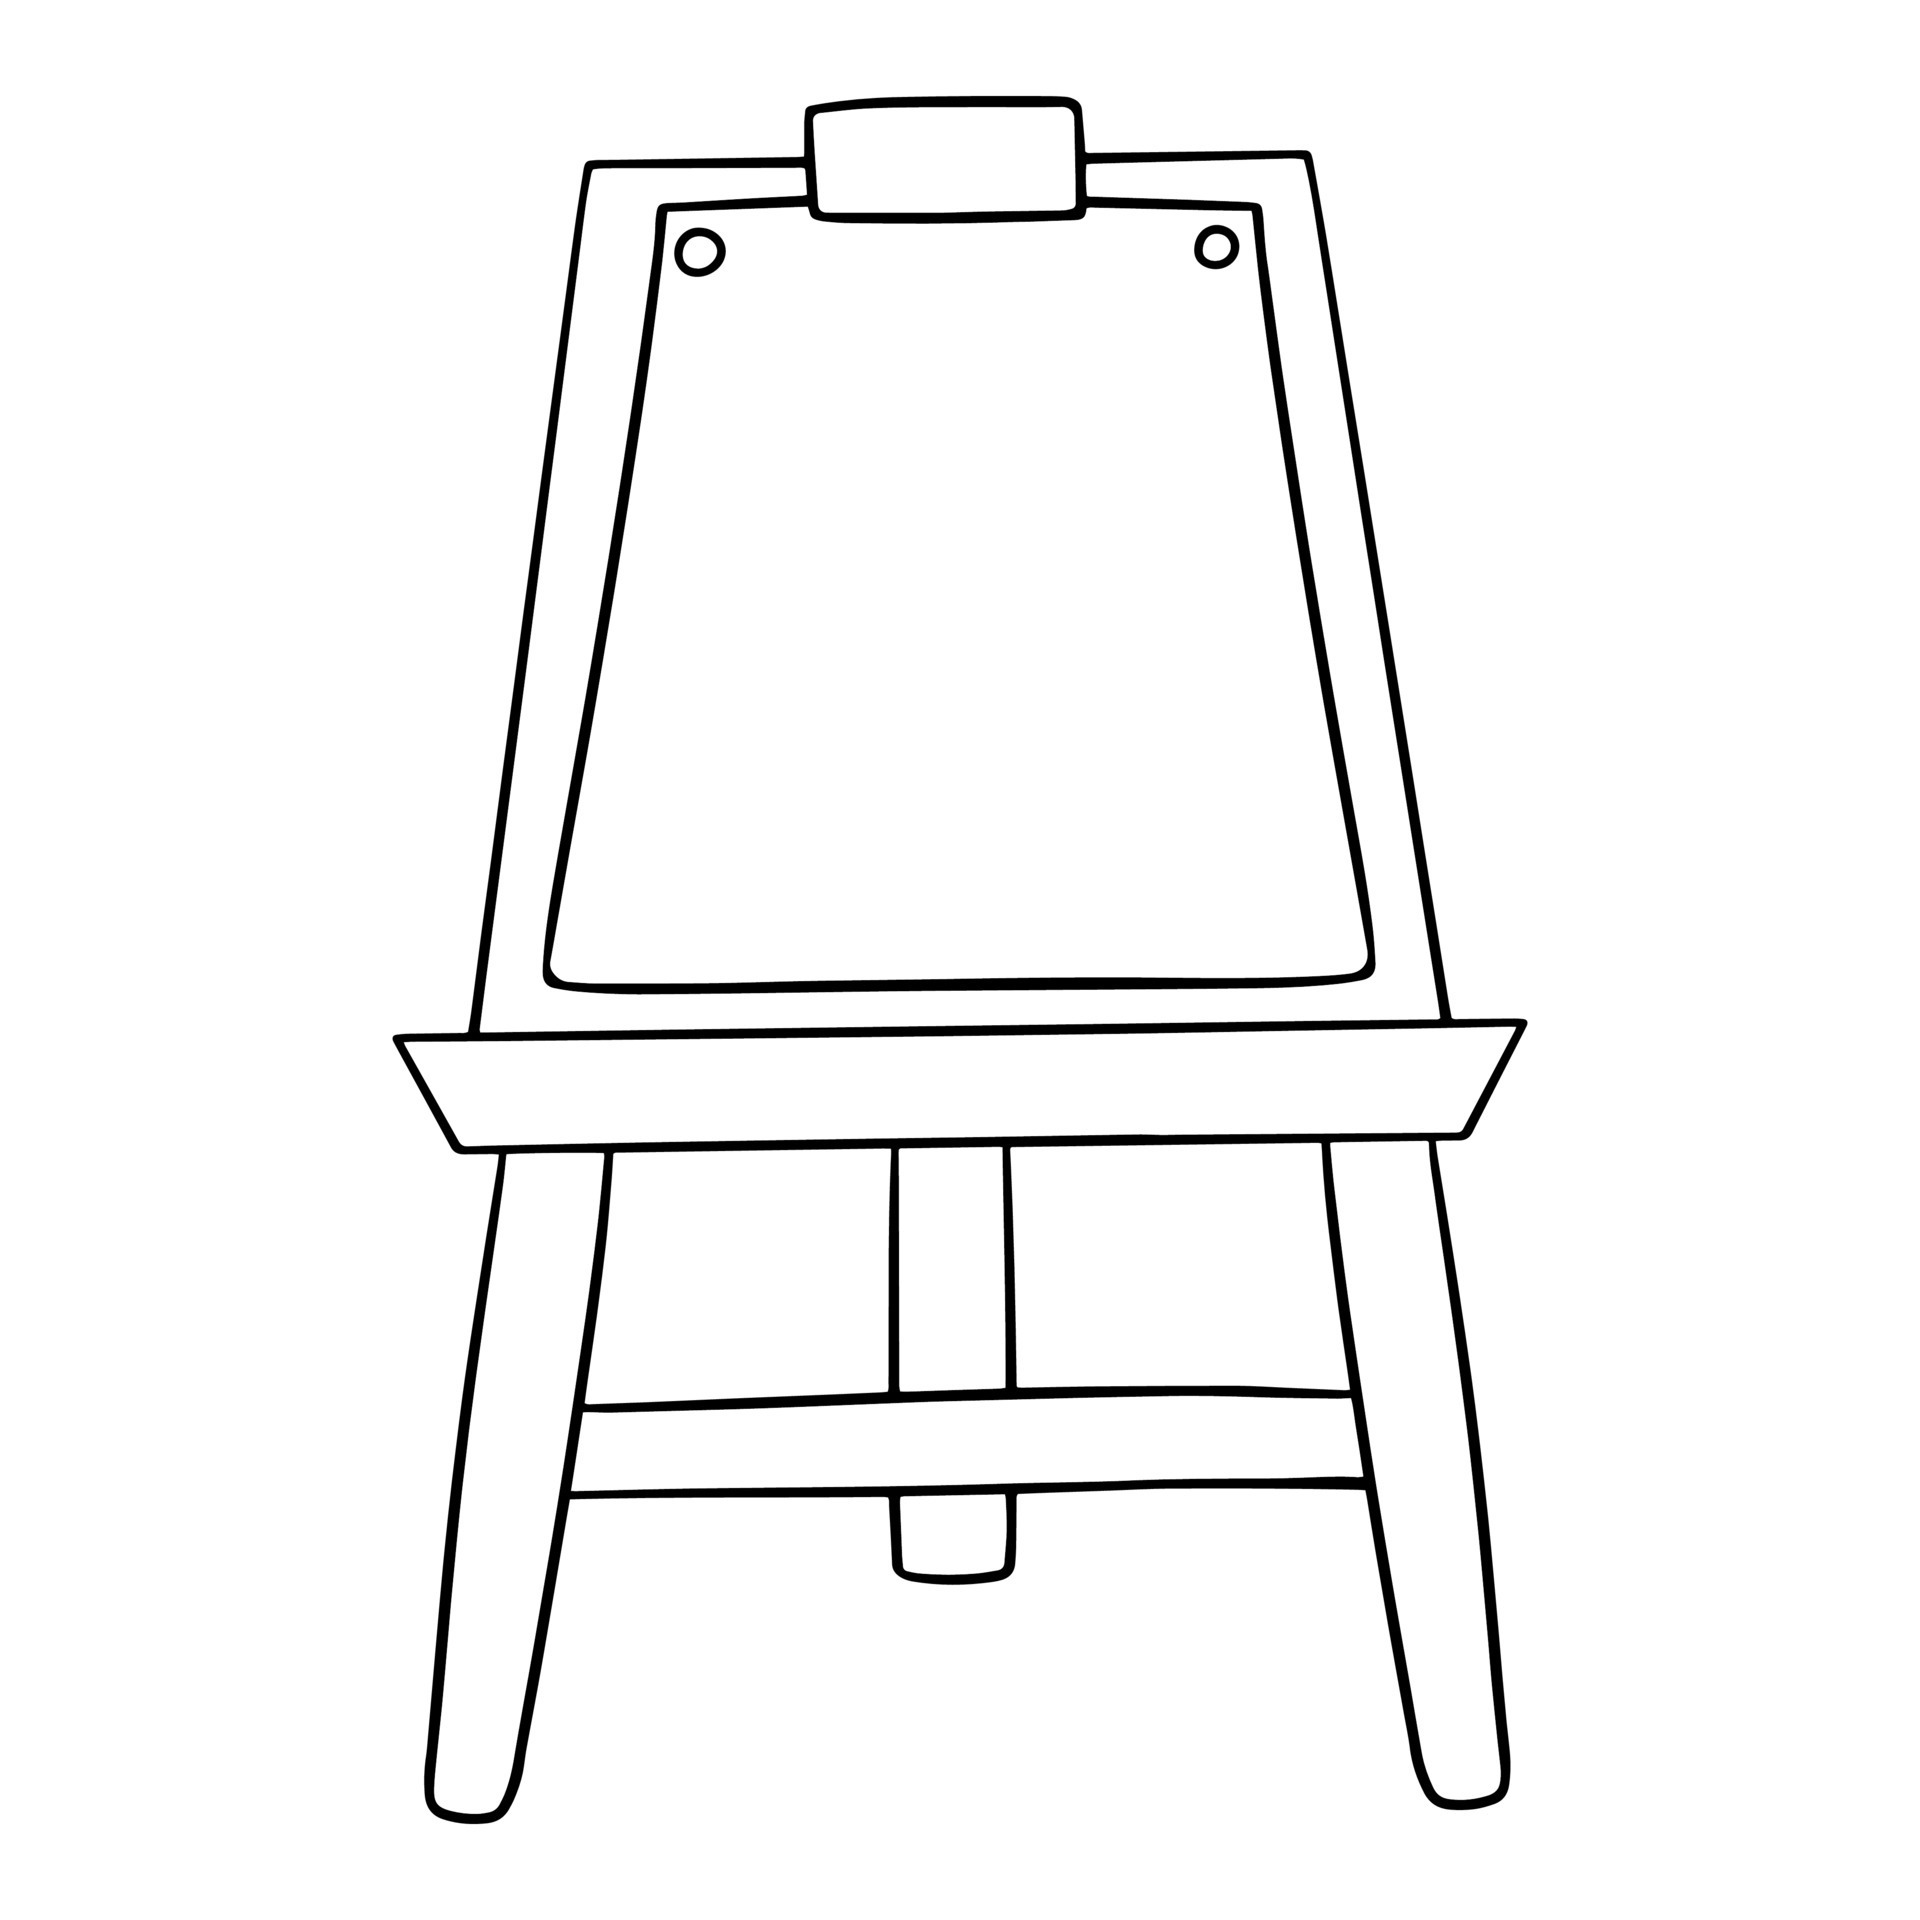 https://static.vecteezy.com/system/resources/previews/008/569/123/original/monochrome-picture-wooden-easel-with-a-sheet-of-paper-illustration-in-cartoon-style-on-a-white-background-vector.jpg